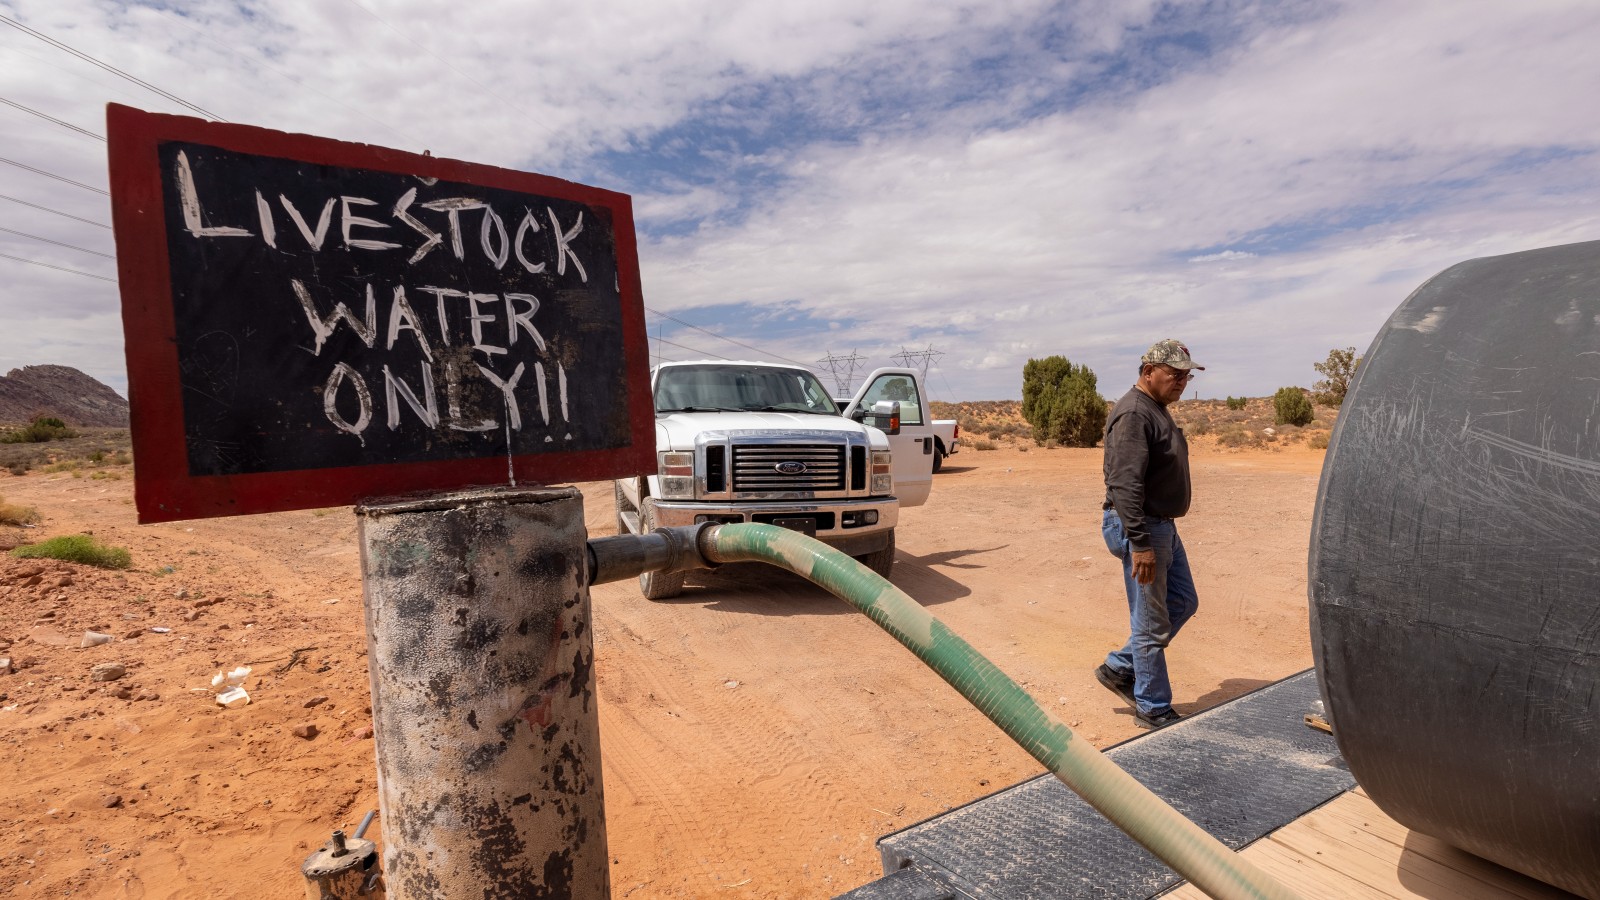 In the desert, a man in a baseball cap and jeans fills up water from a pump that says 